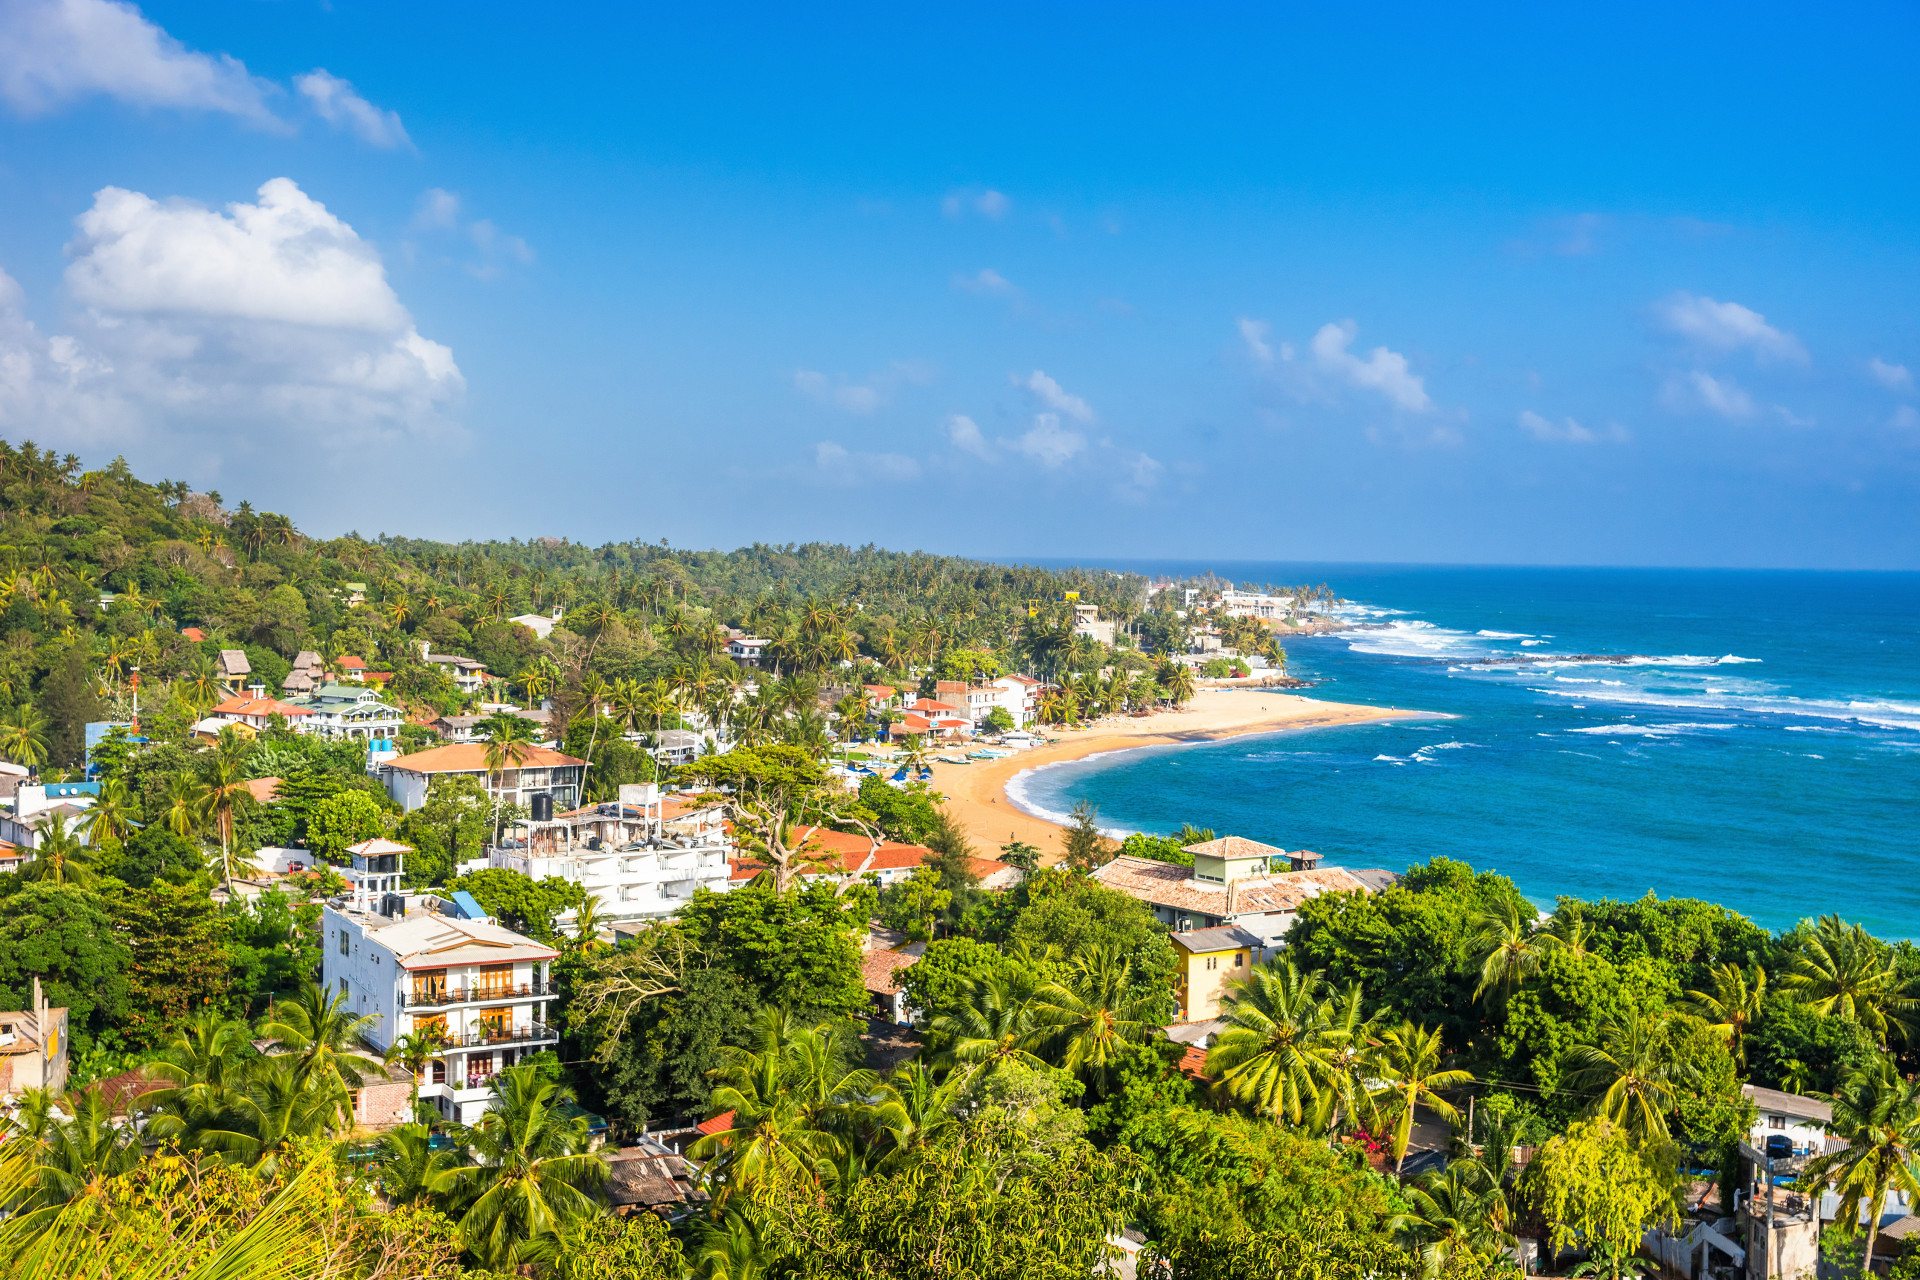 The vibrant town of Unawatuna is one of the country's most popular tourist destinations. Its beautiful crescent-shaped beach is just one of the reasons why.<p><a href="https://www.msn.com/en-us/community/channel/vid-7xx8mnucu55yw63we9va2gwr7uihbxwc68fxqp25x6tg4ftibpra?cvid=94631541bc0f4f89bfd59158d696ad7e">Follow us and access great exclusive content every day</a></p>